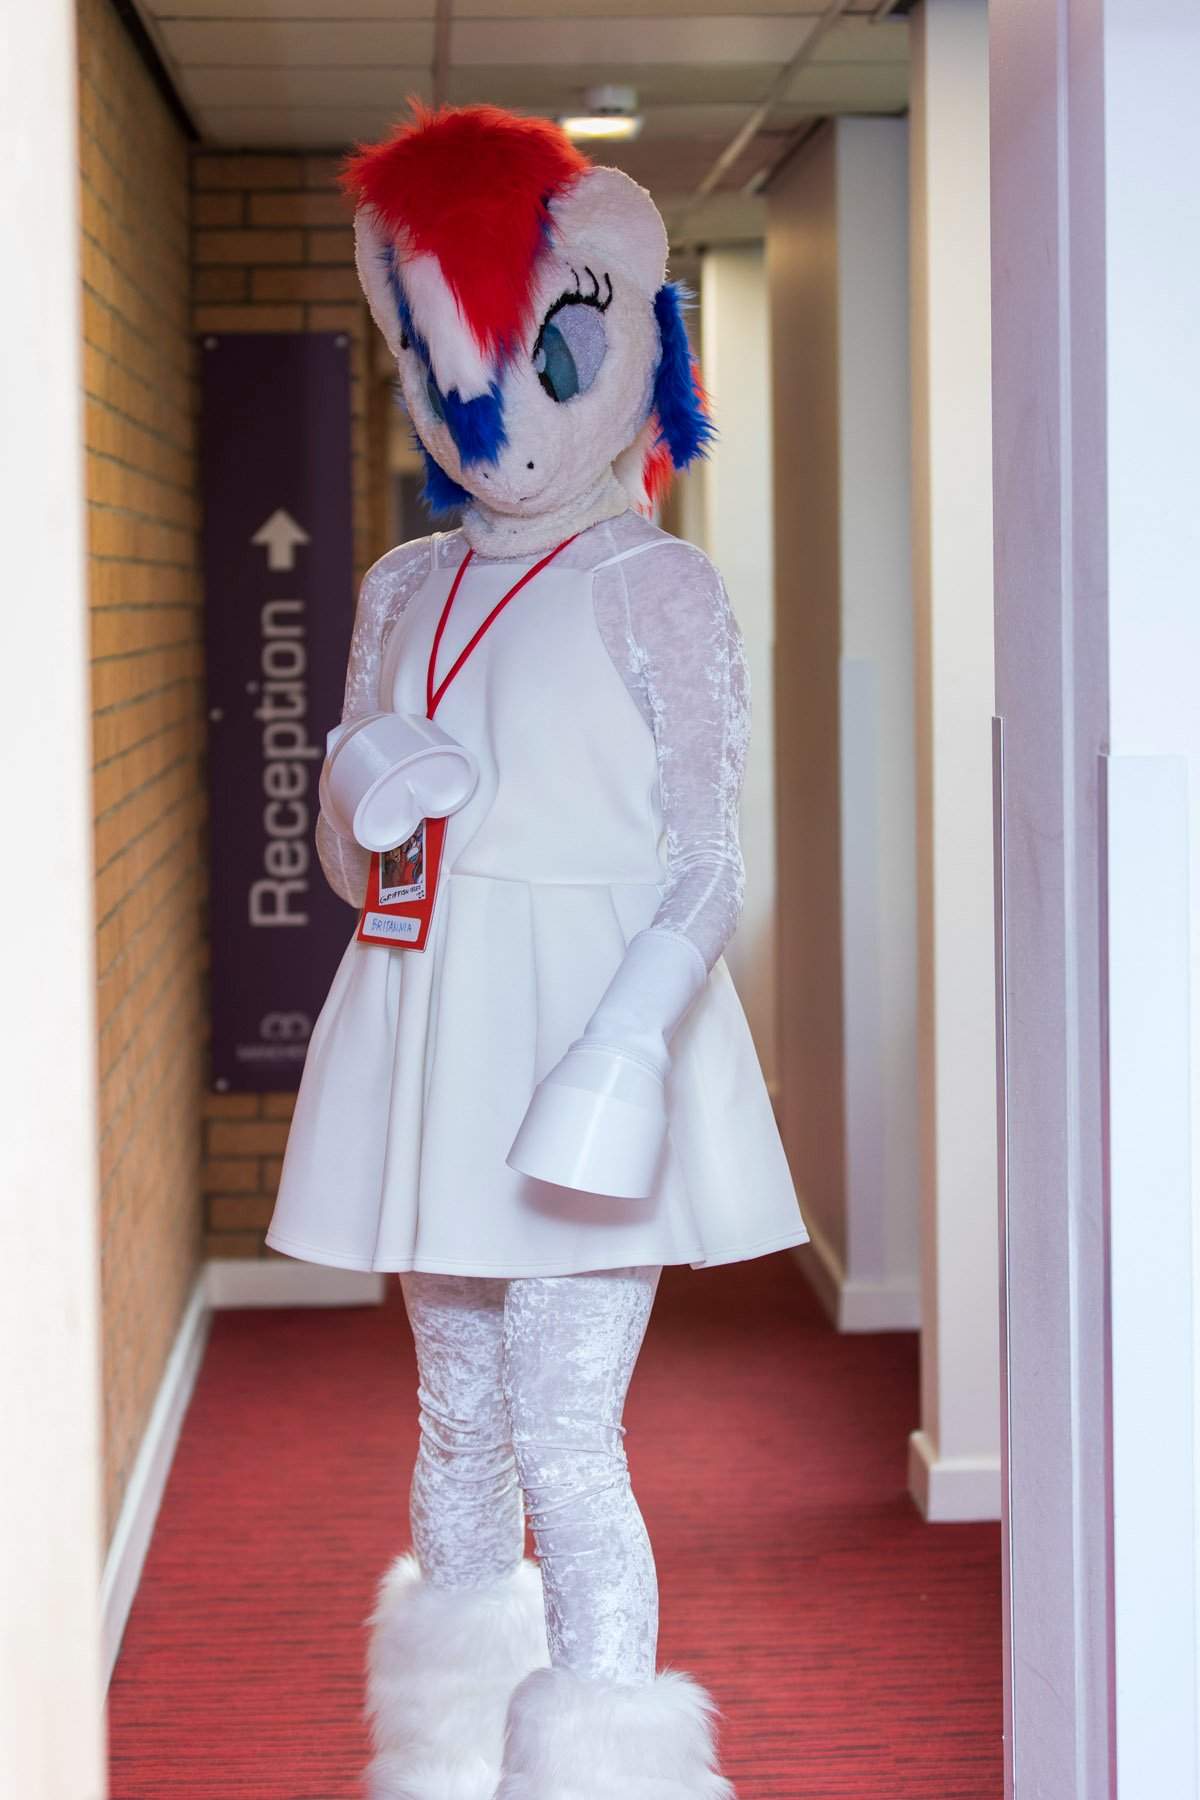 A friend from UK Ponycon!